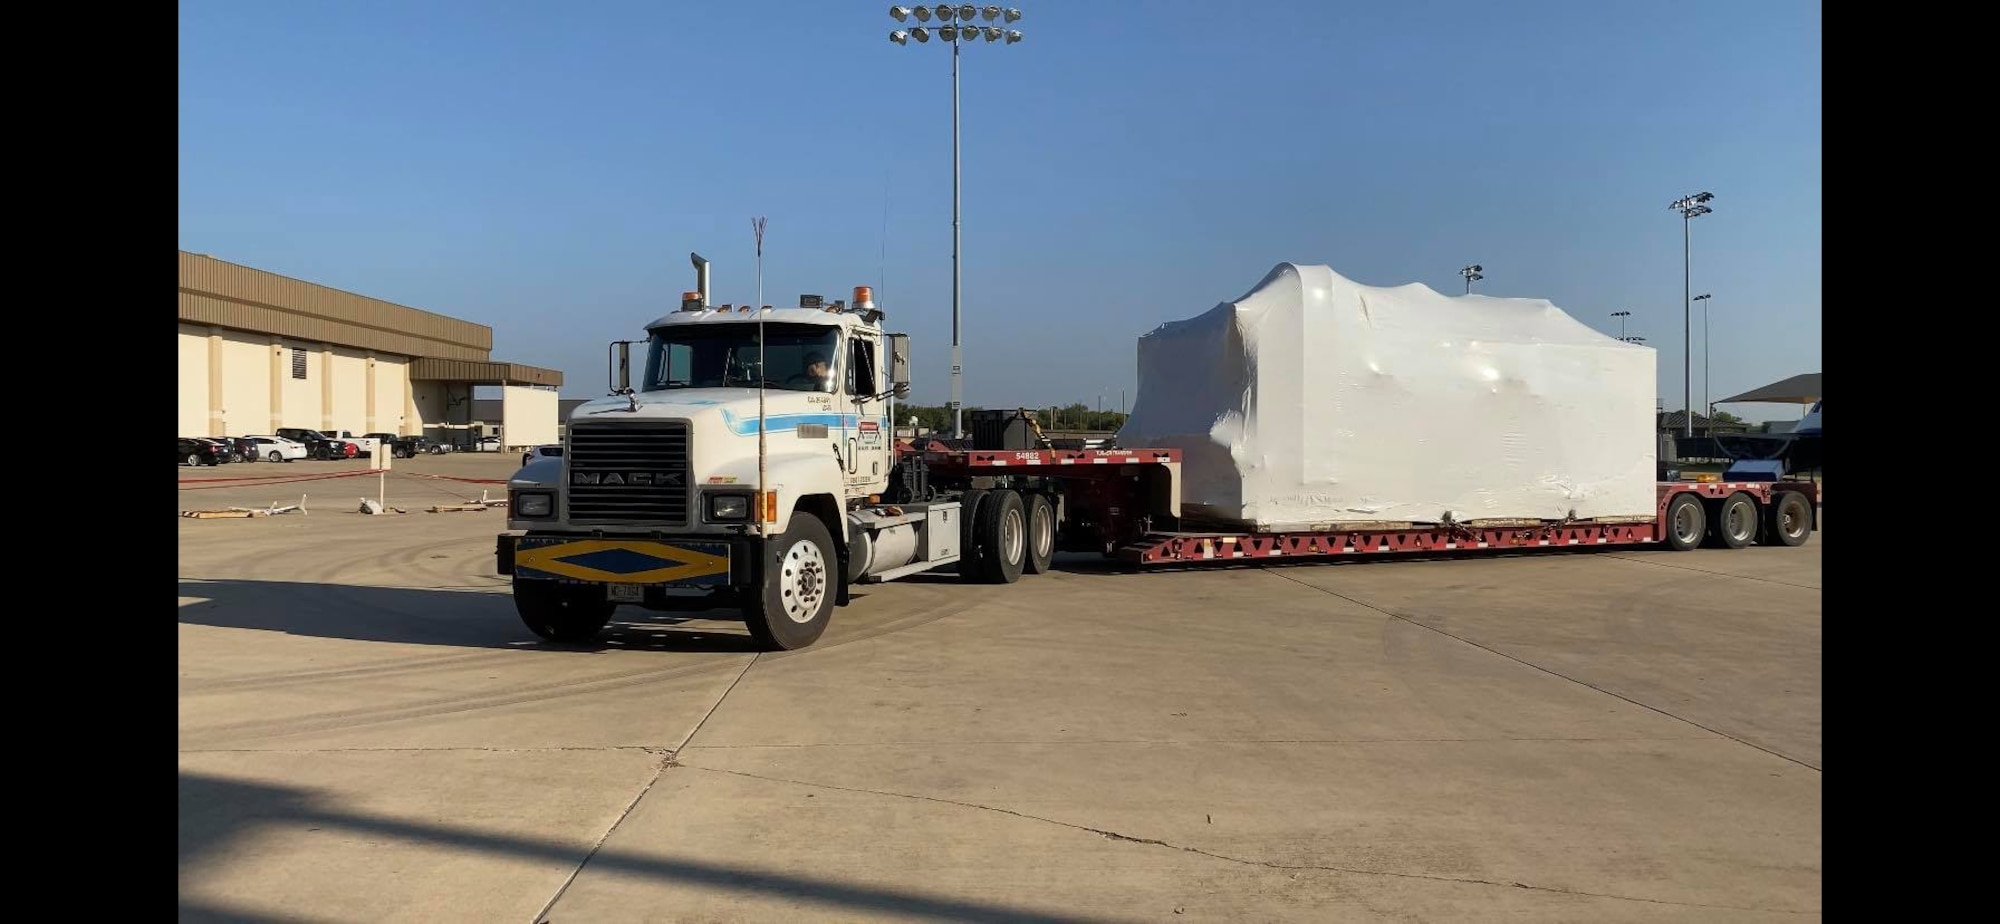 A hypobaric altitude chamber from Tyndall claims the 344th Training Squadron Career Enlisted Aviator Center of Excellence hangar as its new home at Joint Base San Antonio-Lackland, Texas, Aug. 25, 2020.